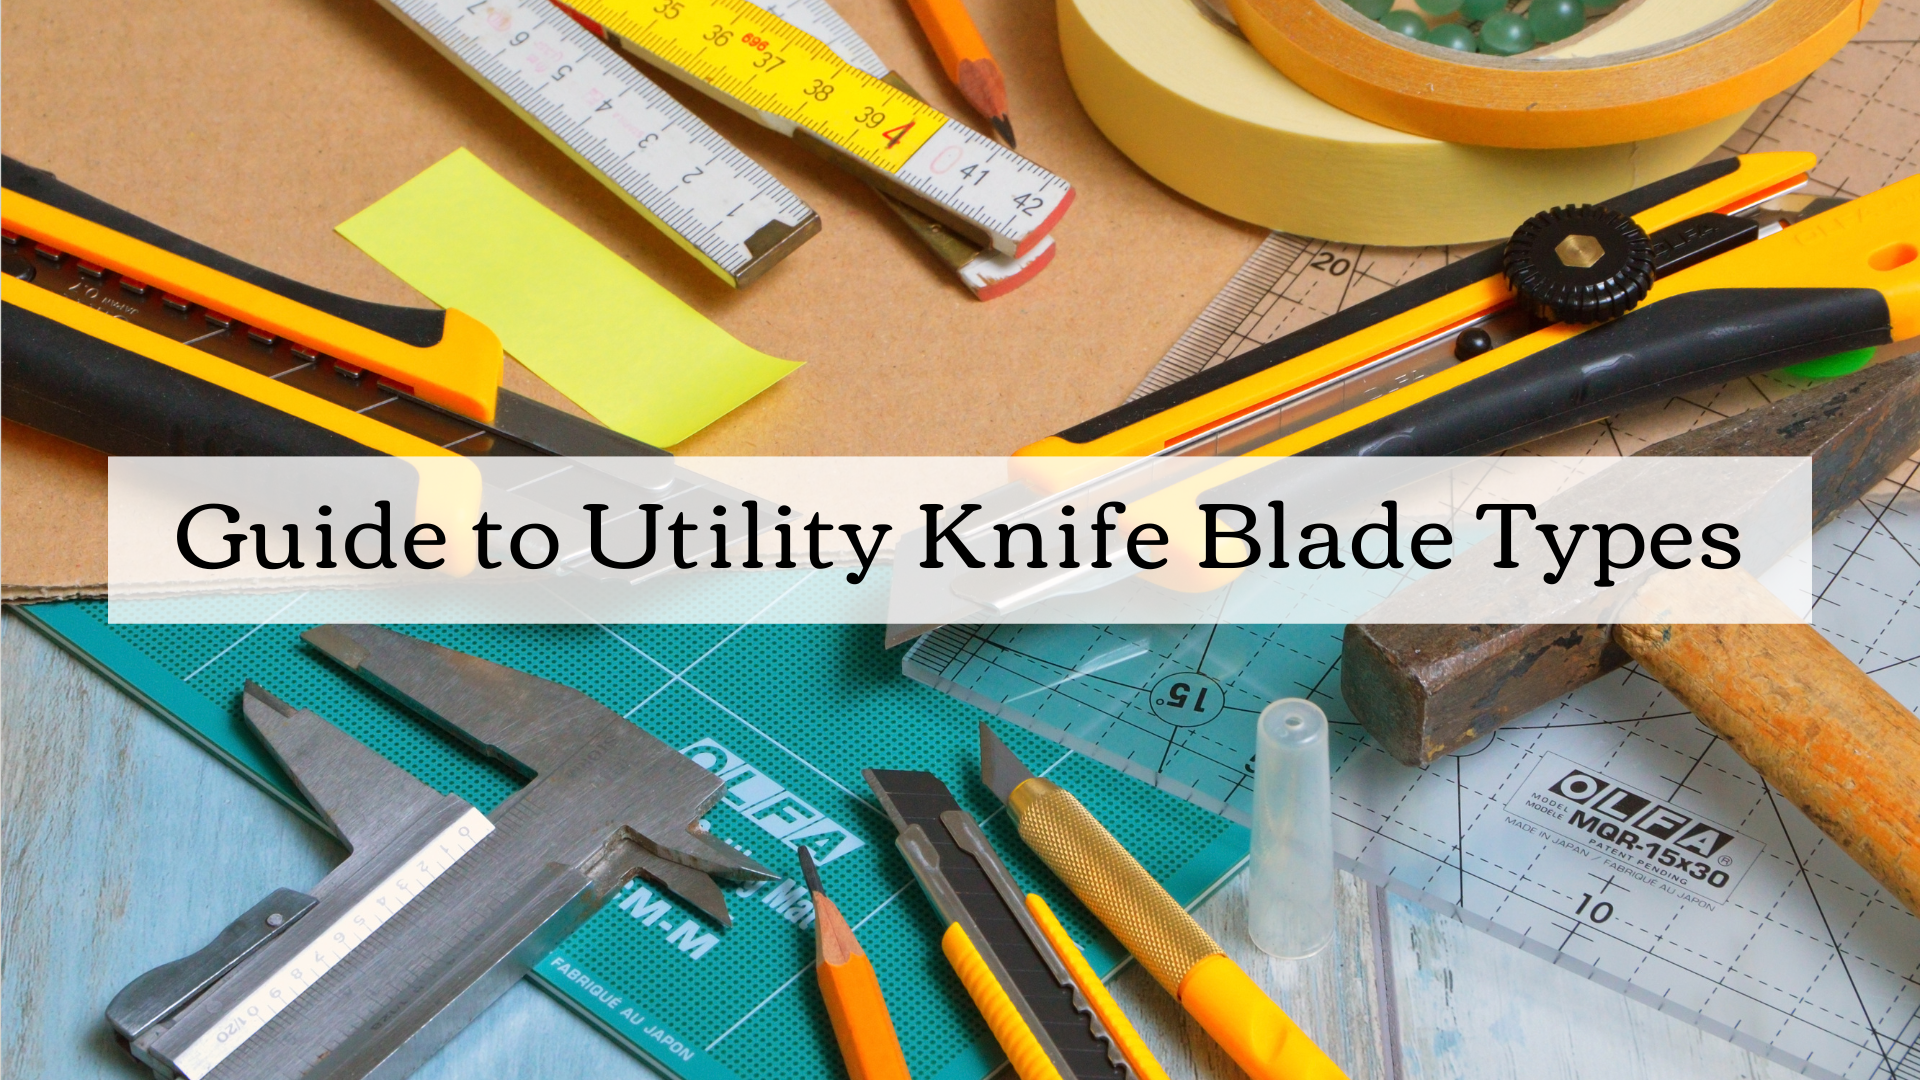 Guide to Utility Knife Blade Types